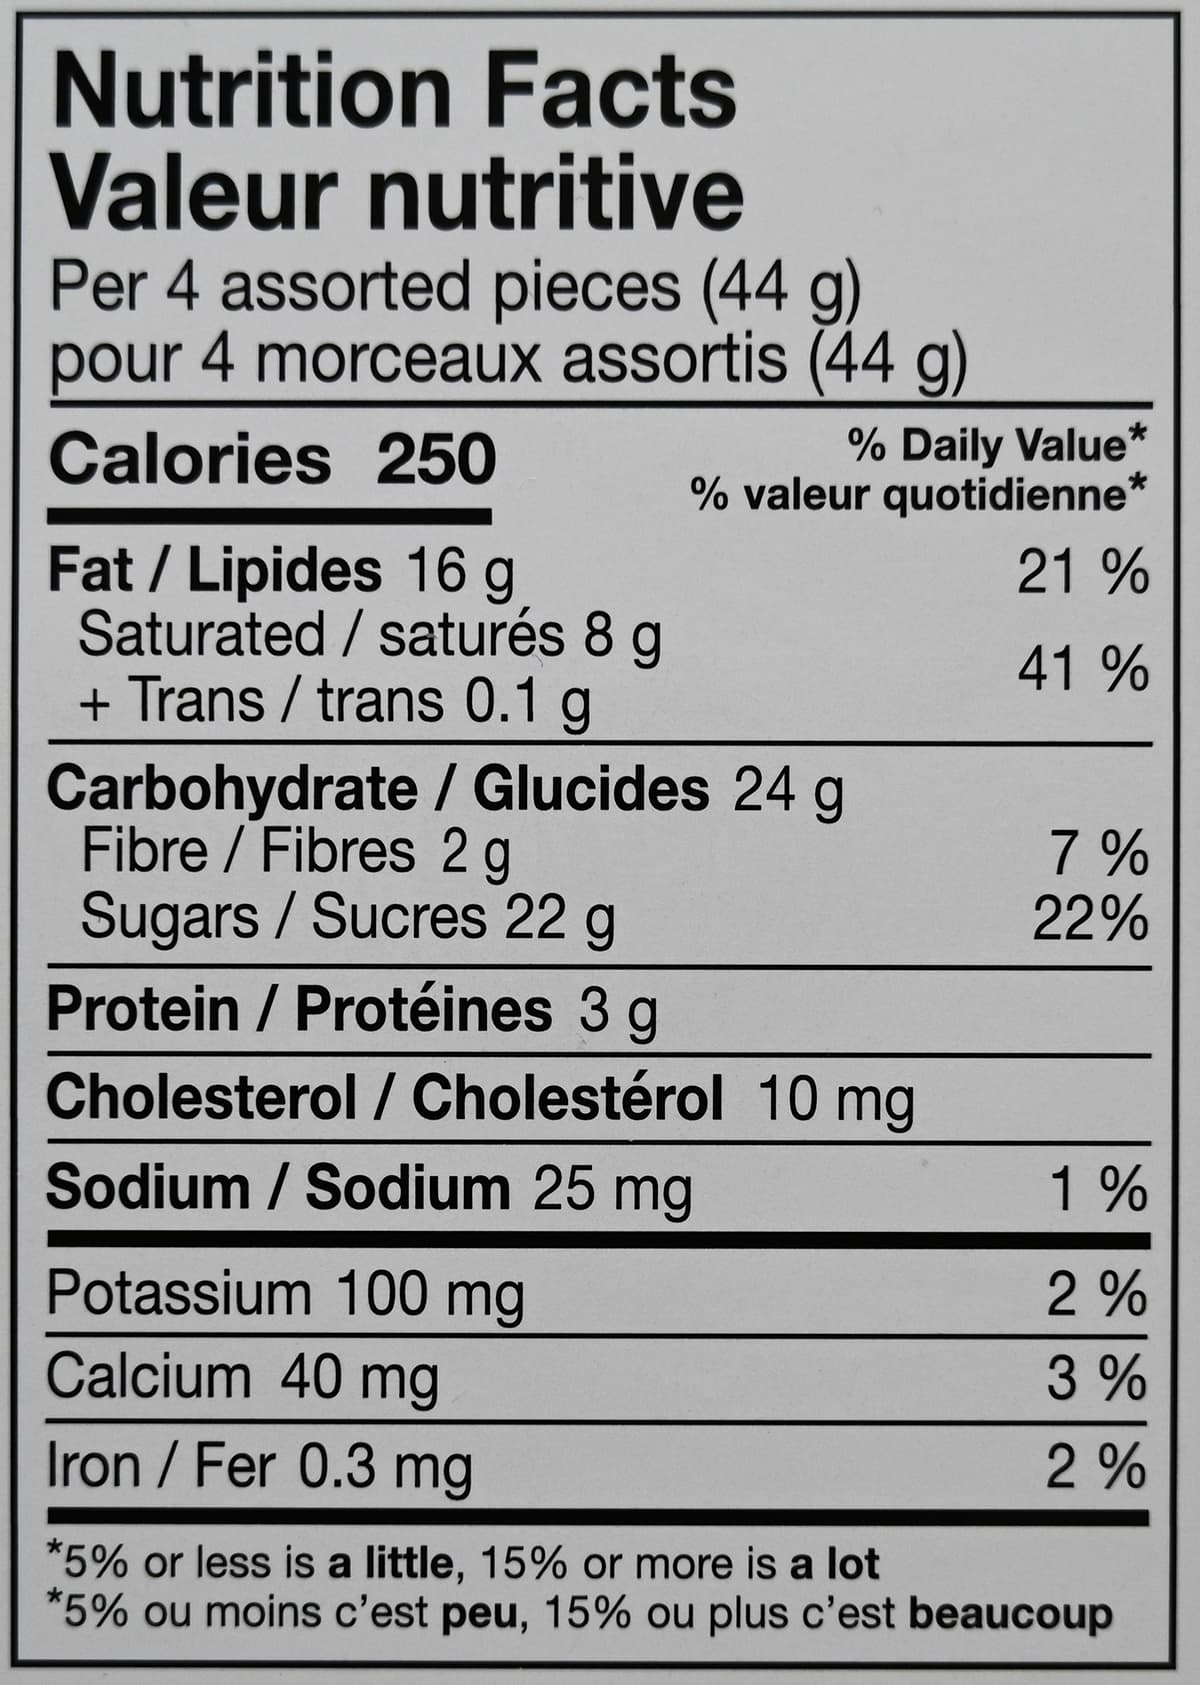 Image of the nutrition facts from thw back of the box.